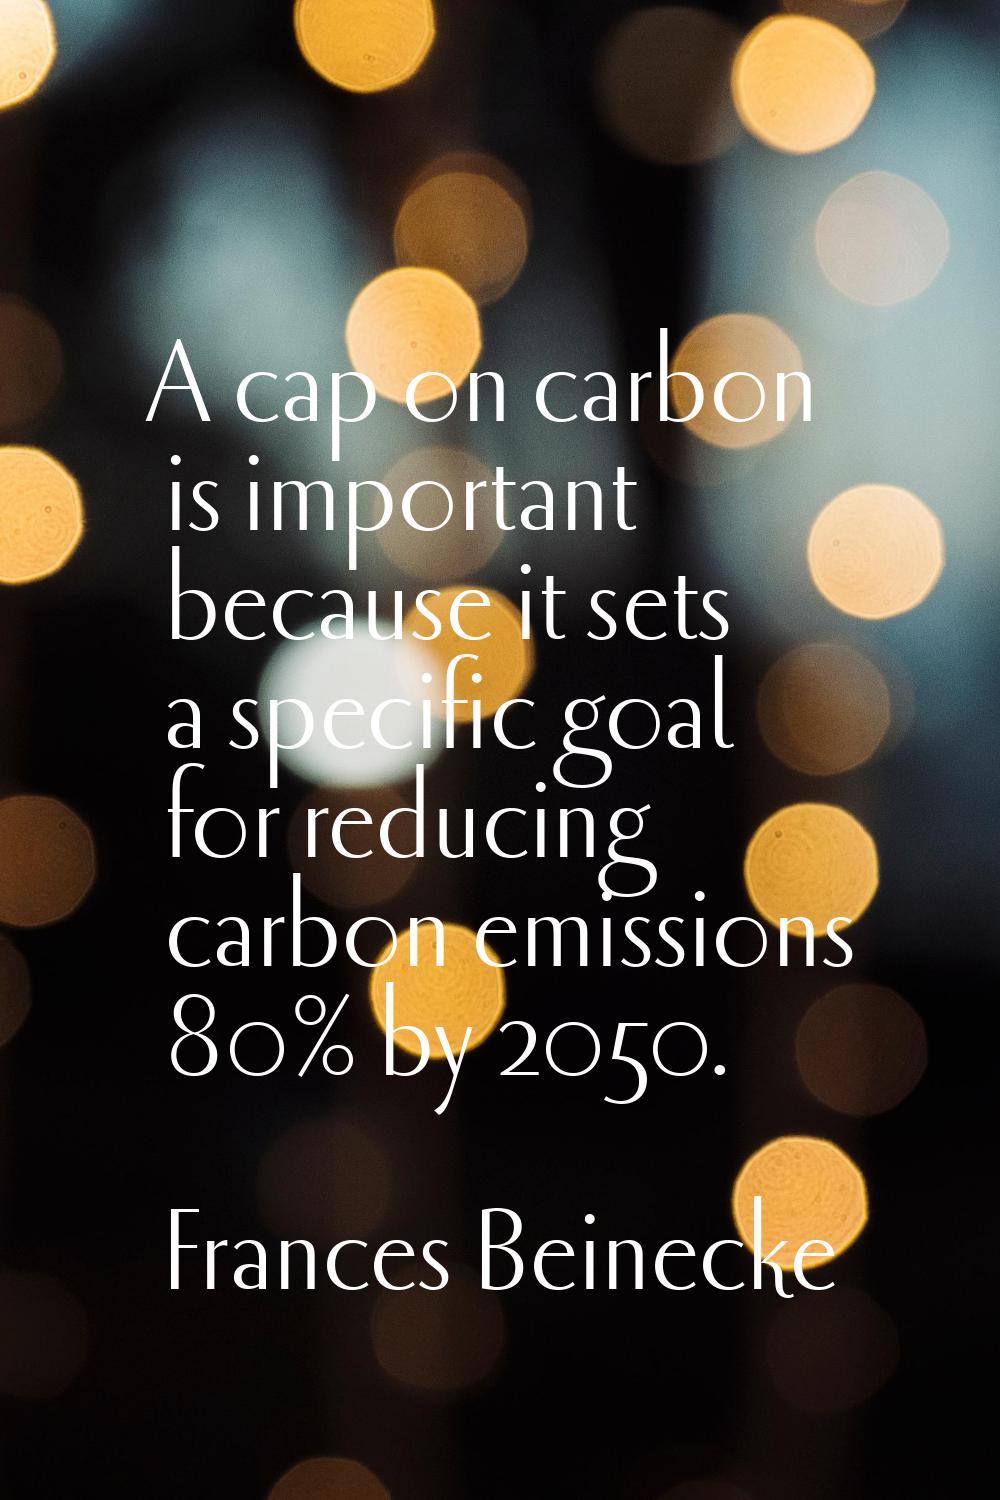 A cap on carbon is important because it sets a specific goal for reducing carbon emissions 80% by 2